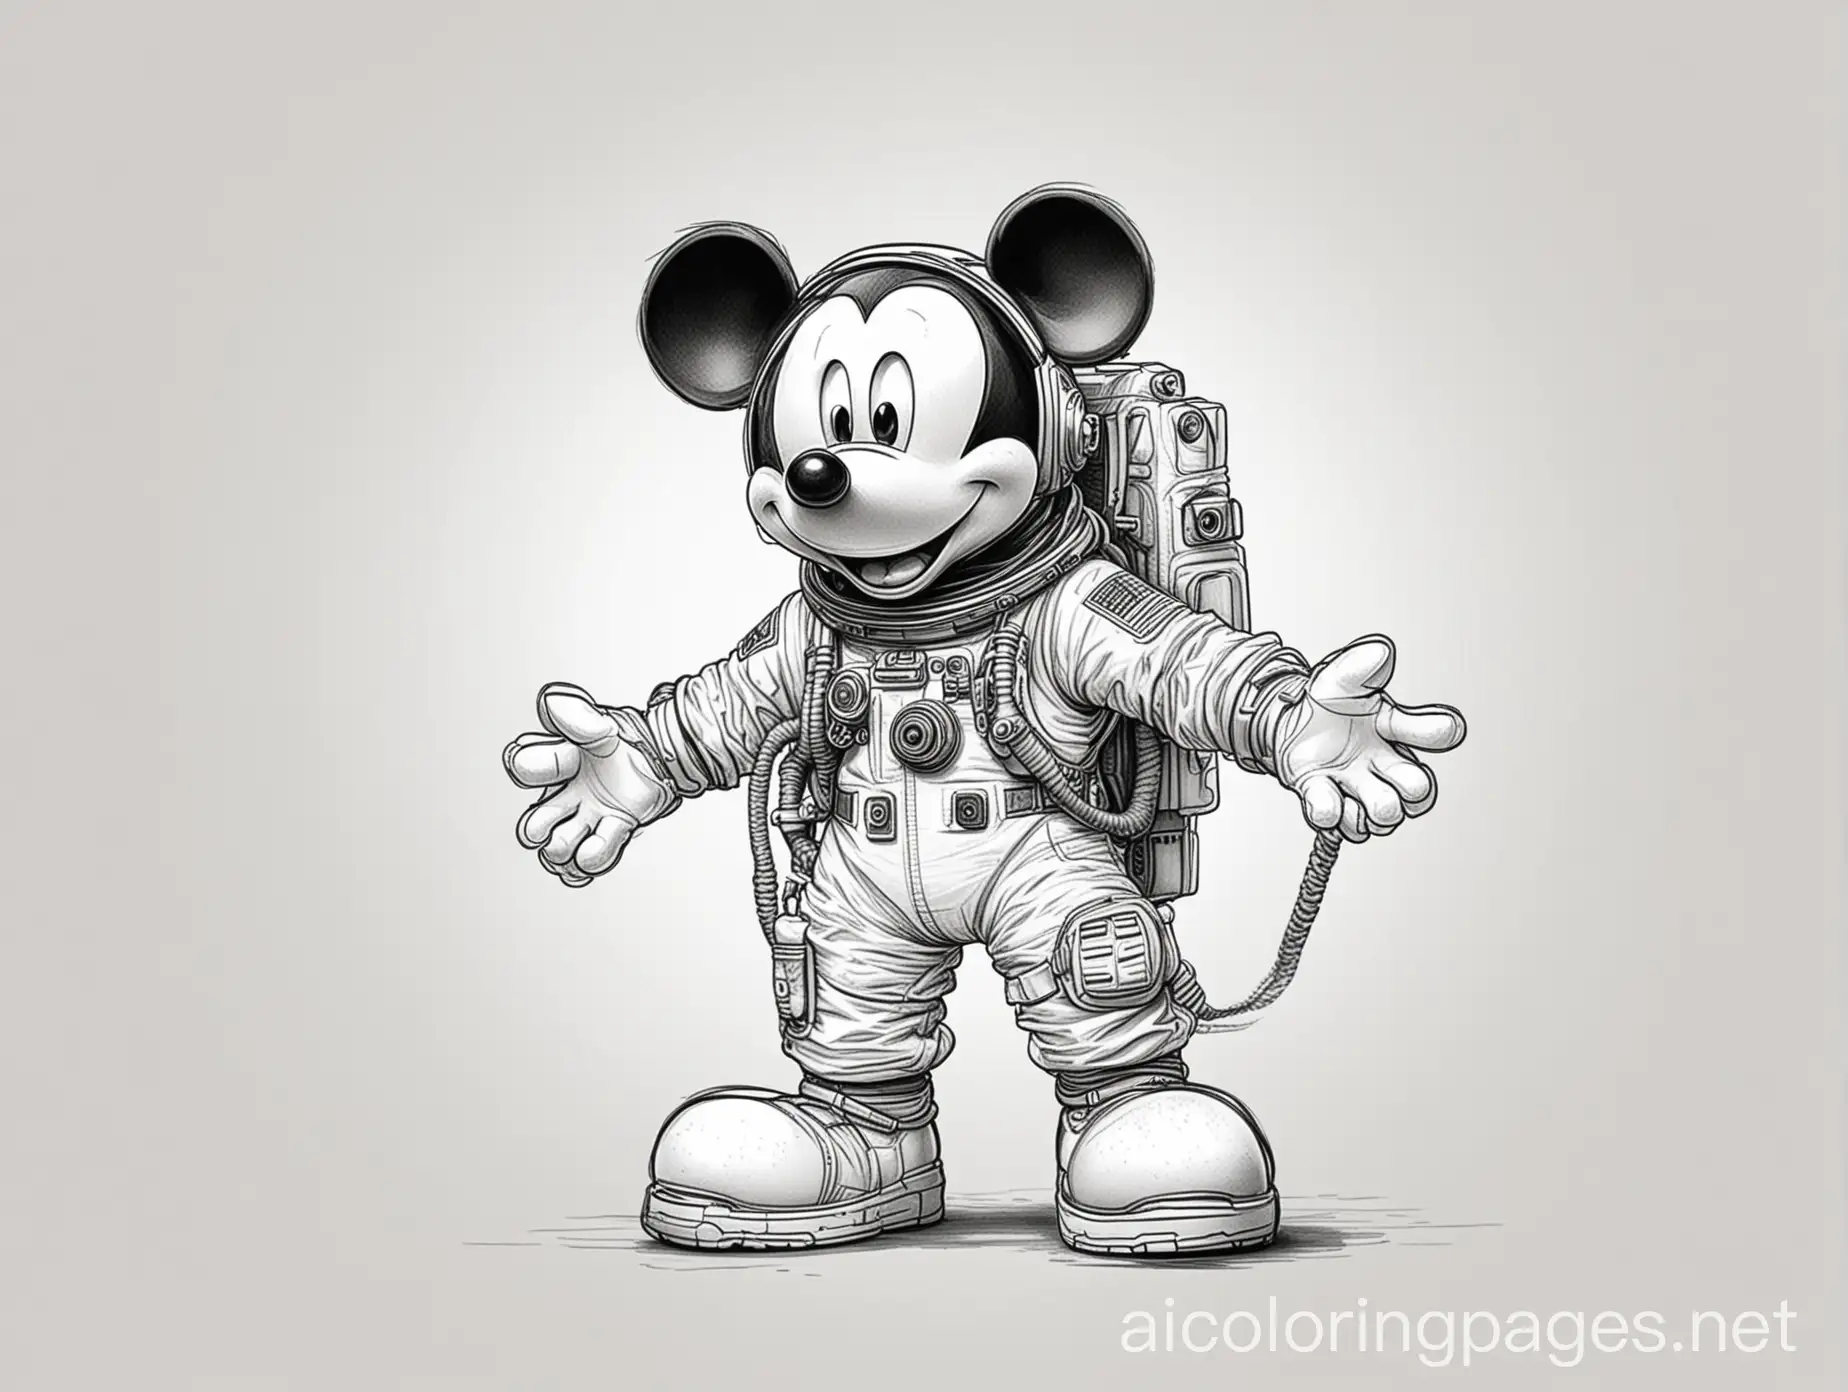 astronaut mickey mouse, Coloring Page, black and white, line art, white background, Simplicity, Ample White Space. The background of the coloring page is plain white to make it easy for young children to color within the lines. The outlines of all the subjects are easy to distinguish, making it simple for kids to color without too much difficulty